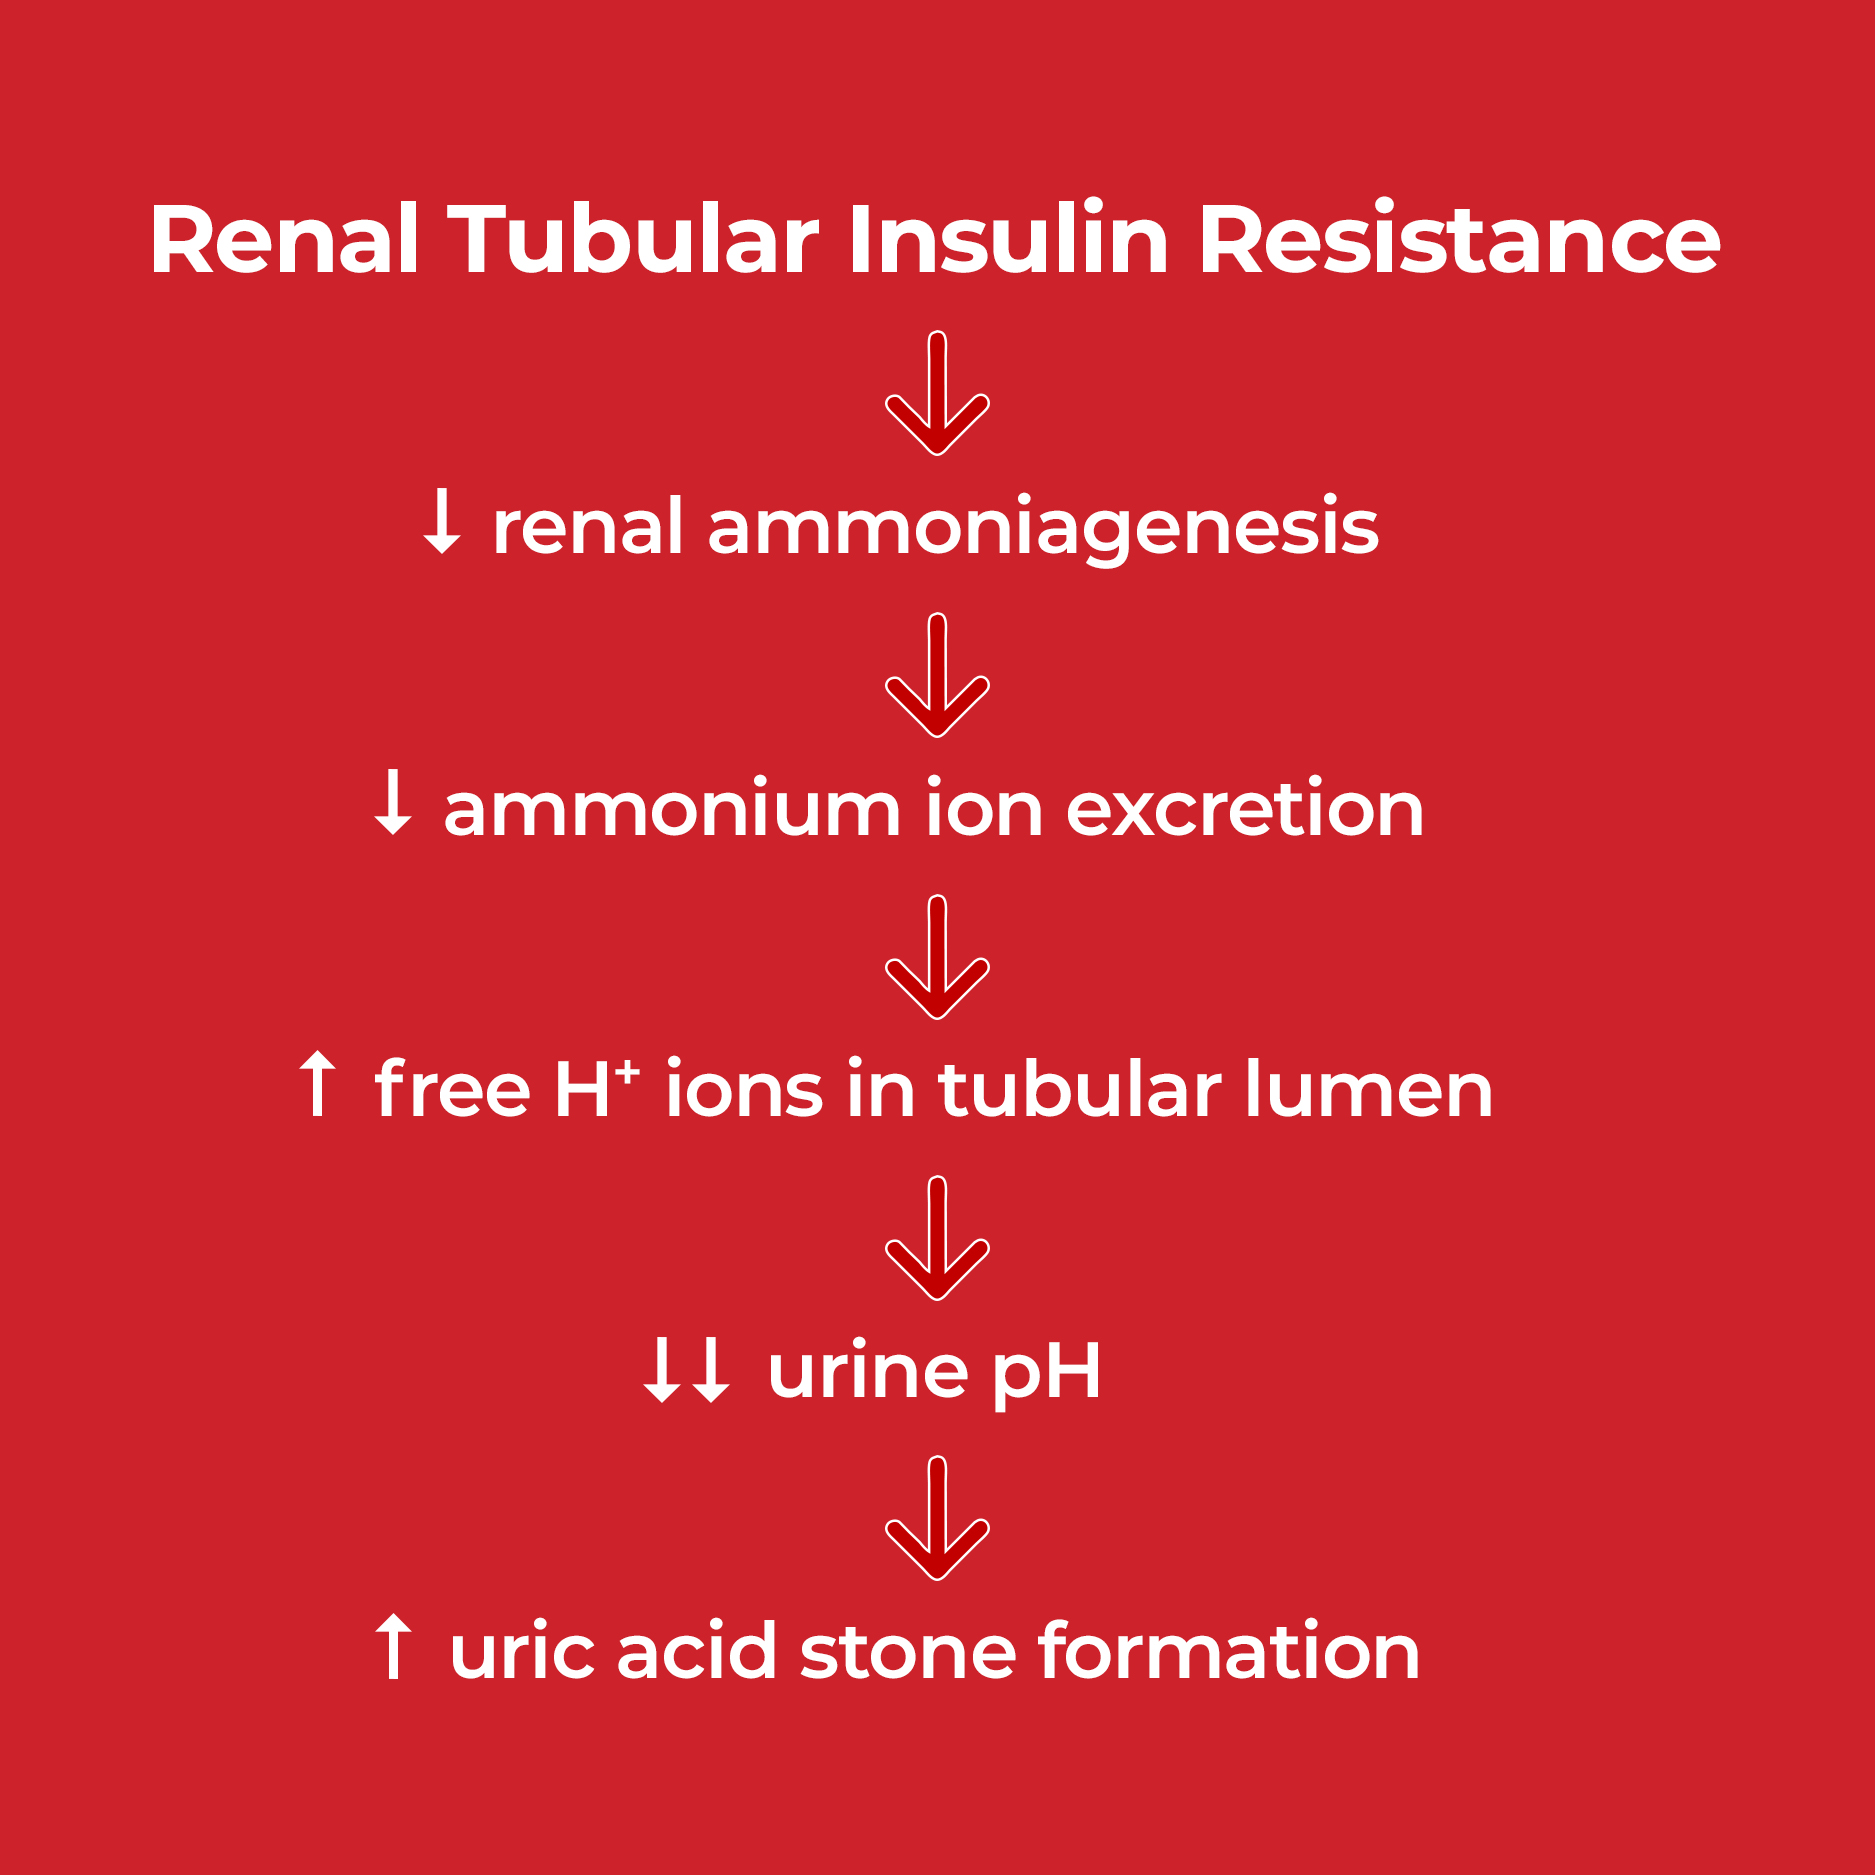 How Insulin Resistance Lead to Uric Acid Stones